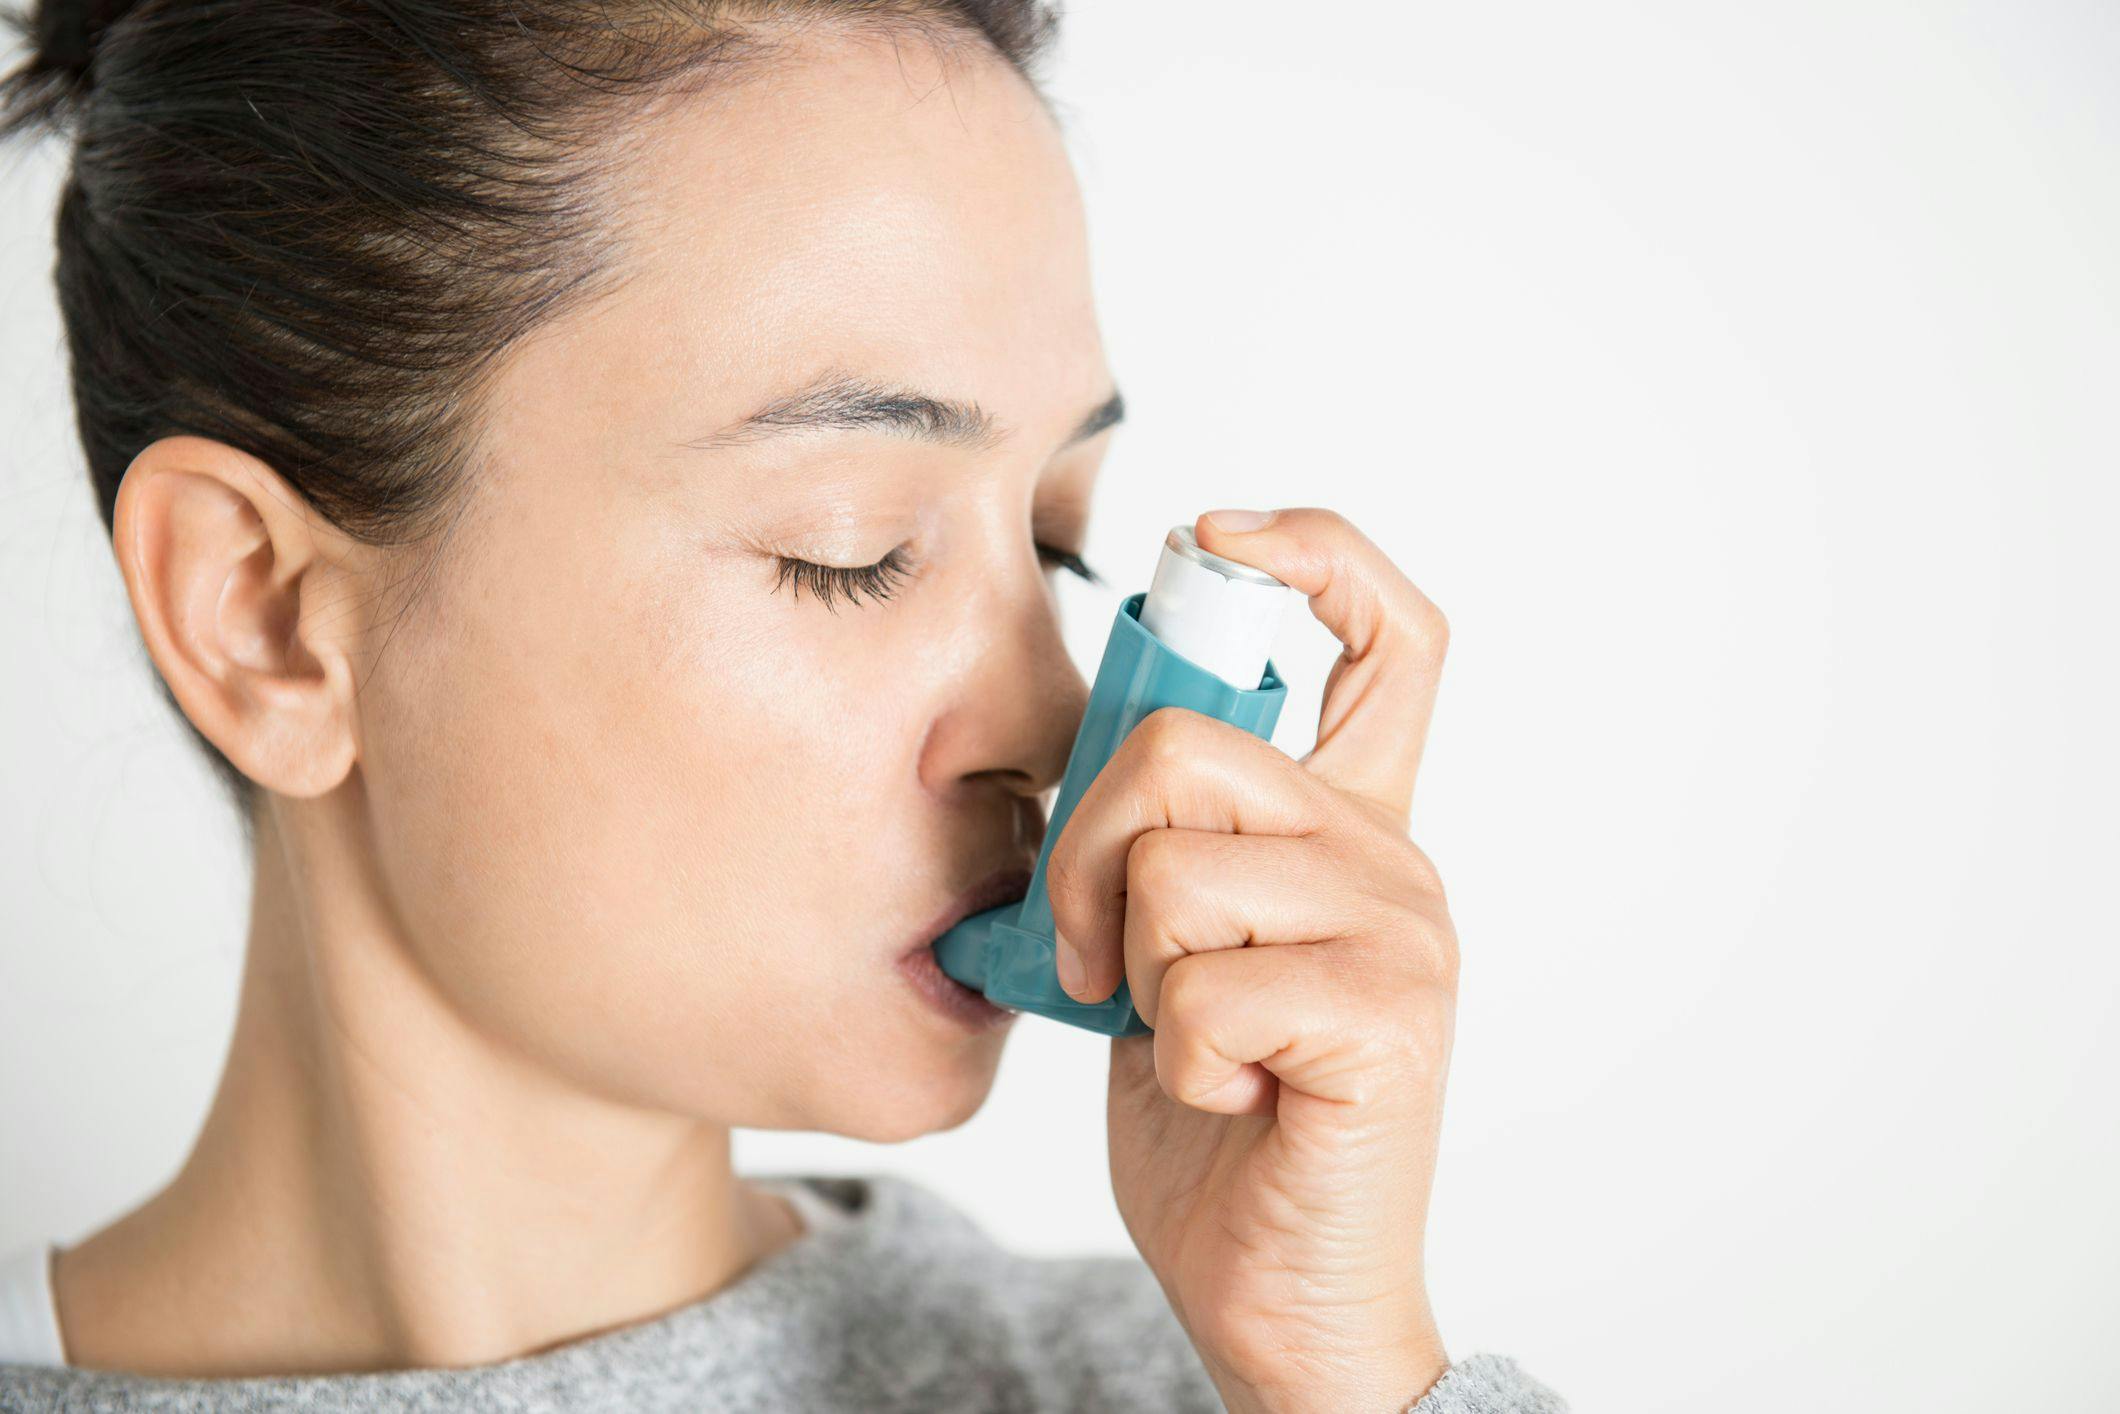 Appropriately Maximizing Asthma-Focused Telehealth Visits